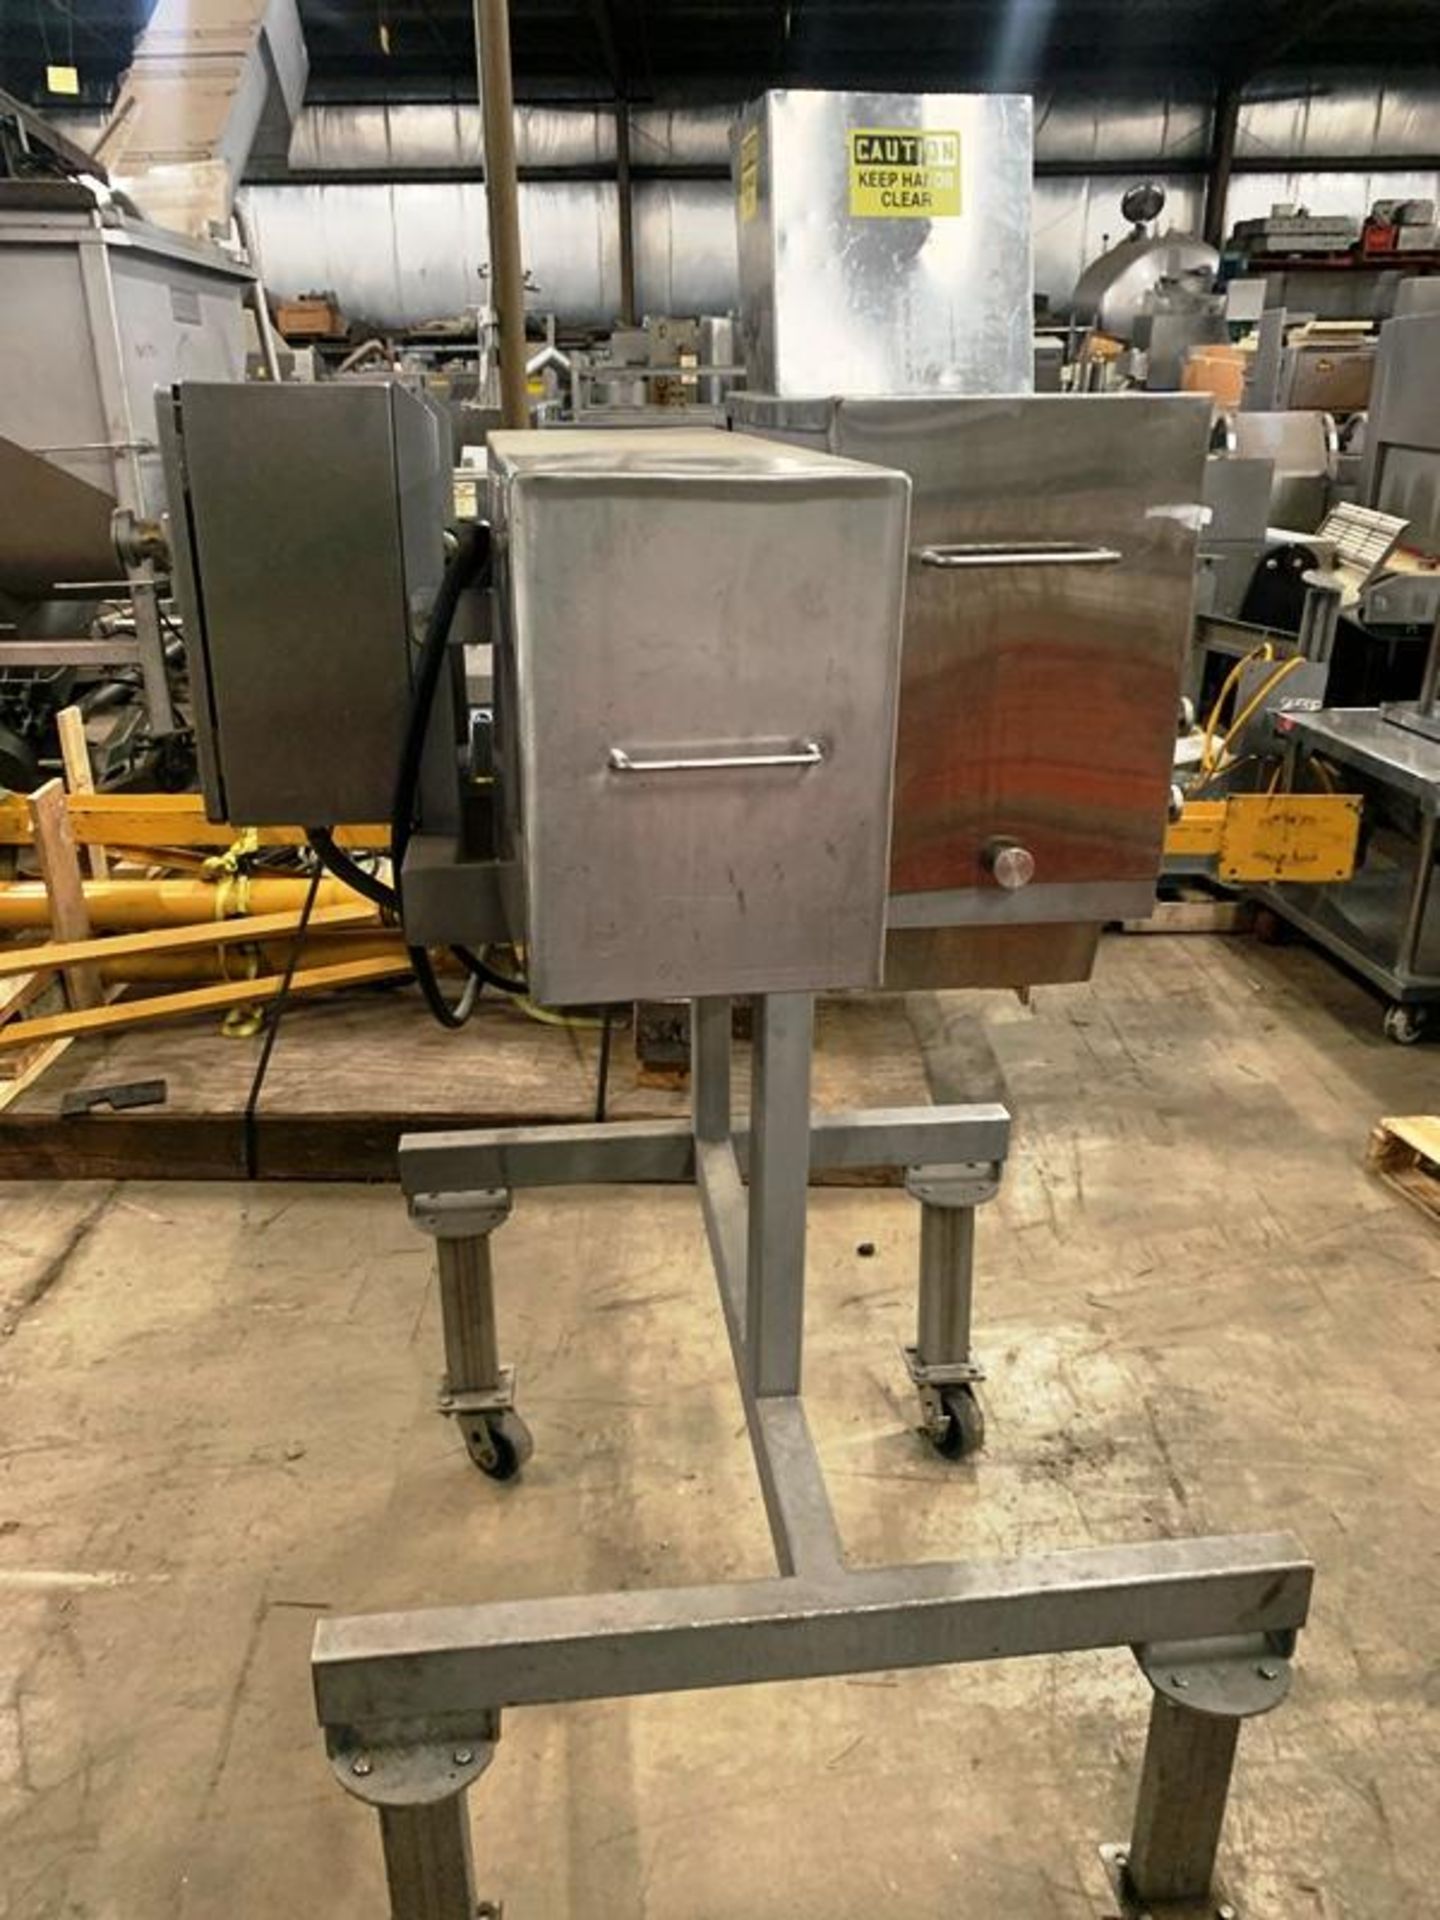 Cove Equipment Mdl. SS10 Jerky Slicer (Located in Sandwich, IL) - Image 5 of 7